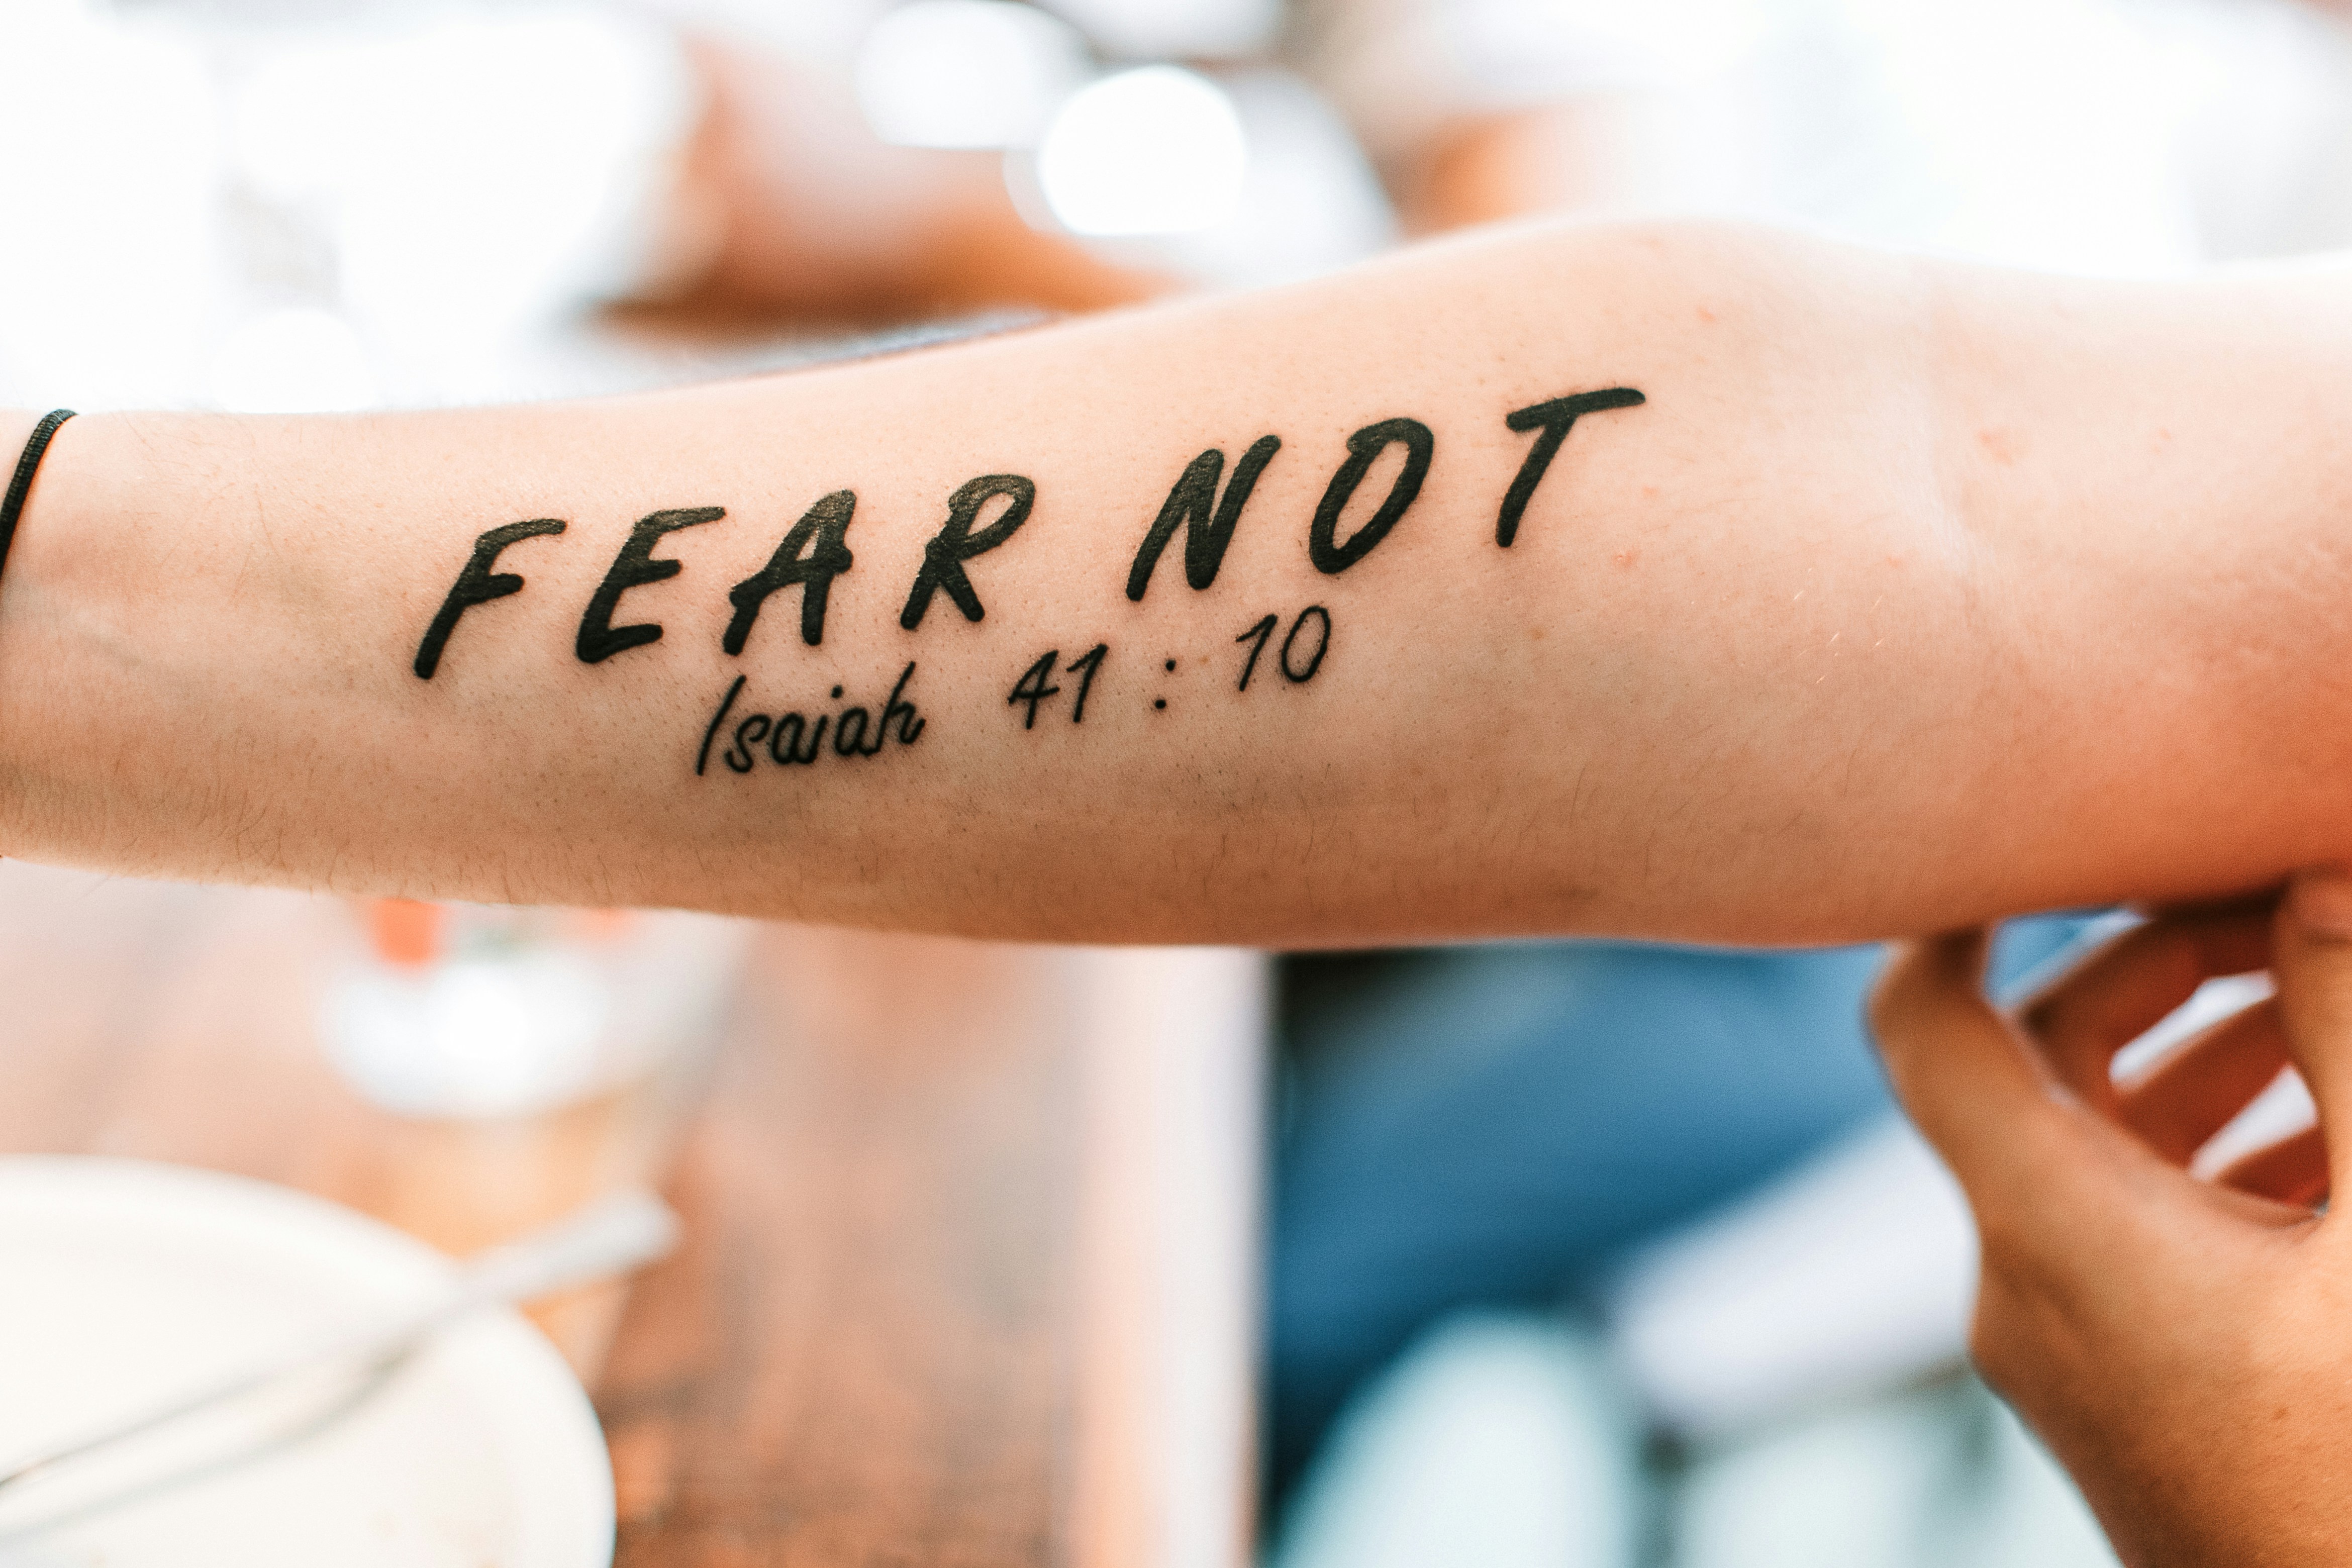 Person with fear not tattoo on arm photo – Free Bible verse Image on Unsplash